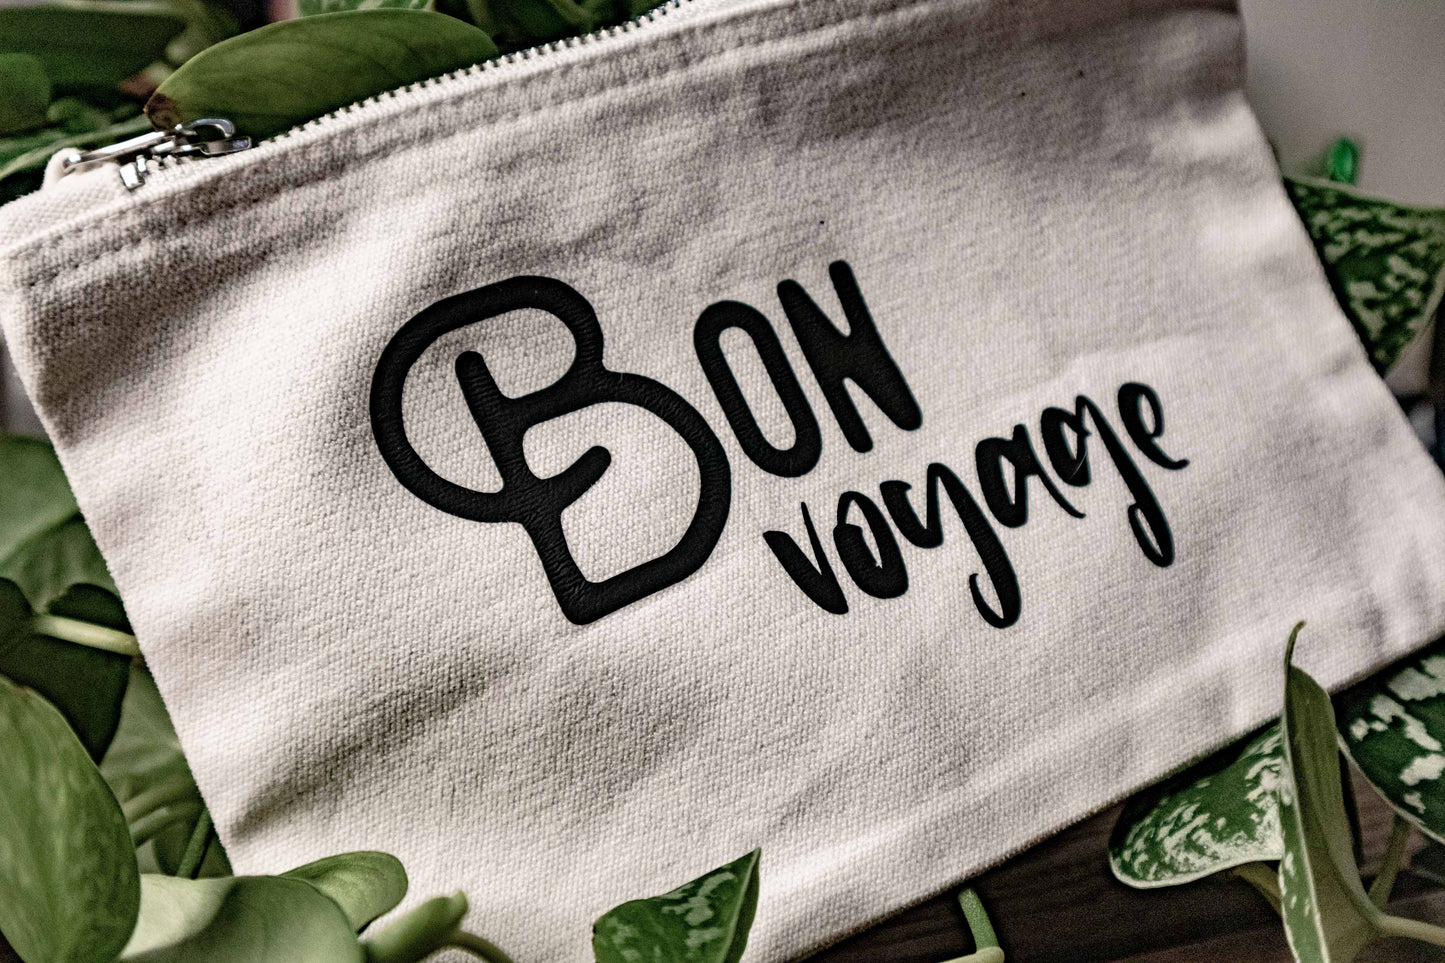 Bon Voyage - Funny Cotton Zipper Pouch for Travel, Makeup, toiletries, documents, snack, and more